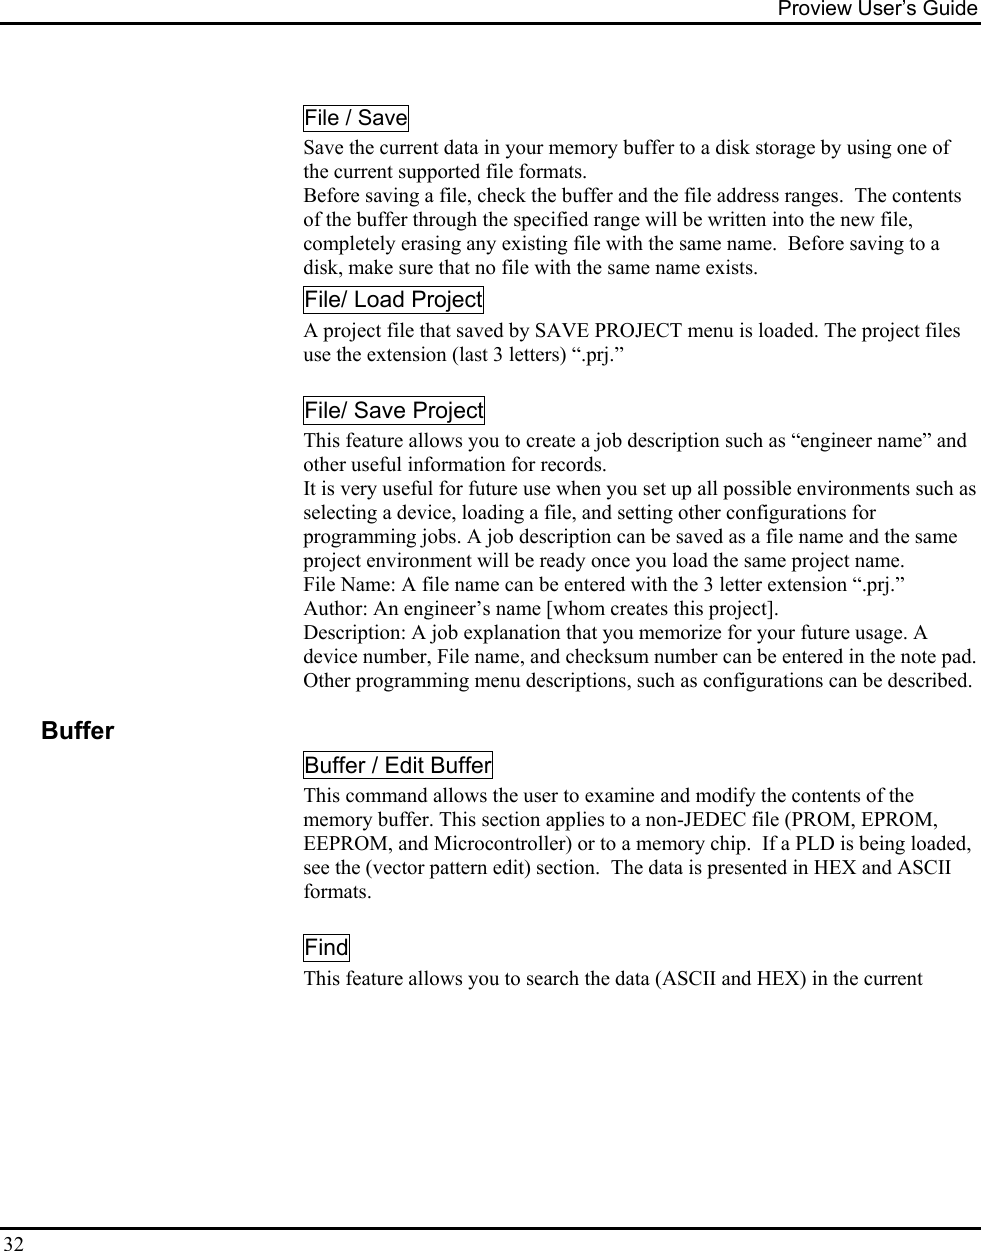 Proview User’s Guide  32  File / Save Save the current data in your memory buffer to a disk storage by using one of the current supported file formats. Before saving a file, check the buffer and the file address ranges.  The contents of the buffer through the specified range will be written into the new file, completely erasing any existing file with the same name.  Before saving to a disk, make sure that no file with the same name exists. File/ Load Project A project file that saved by SAVE PROJECT menu is loaded. The project files use the extension (last 3 letters) “.prj.”    File/ Save Project This feature allows you to create a job description such as “engineer name” and other useful information for records. It is very useful for future use when you set up all possible environments such as selecting a device, loading a file, and setting other configurations for programming jobs. A job description can be saved as a file name and the same project environment will be ready once you load the same project name.  File Name: A file name can be entered with the 3 letter extension “.prj.” Author: An engineer’s name [whom creates this project]. Description: A job explanation that you memorize for your future usage. A device number, File name, and checksum number can be entered in the note pad.  Other programming menu descriptions, such as configurations can be described.    Buffer Buffer / Edit Buffer This command allows the user to examine and modify the contents of the memory buffer. This section applies to a non-JEDEC file (PROM, EPROM, EEPROM, and Microcontroller) or to a memory chip.  If a PLD is being loaded, see the (vector pattern edit) section.  The data is presented in HEX and ASCII formats.   Find    This feature allows you to search the data (ASCII and HEX) in the current   